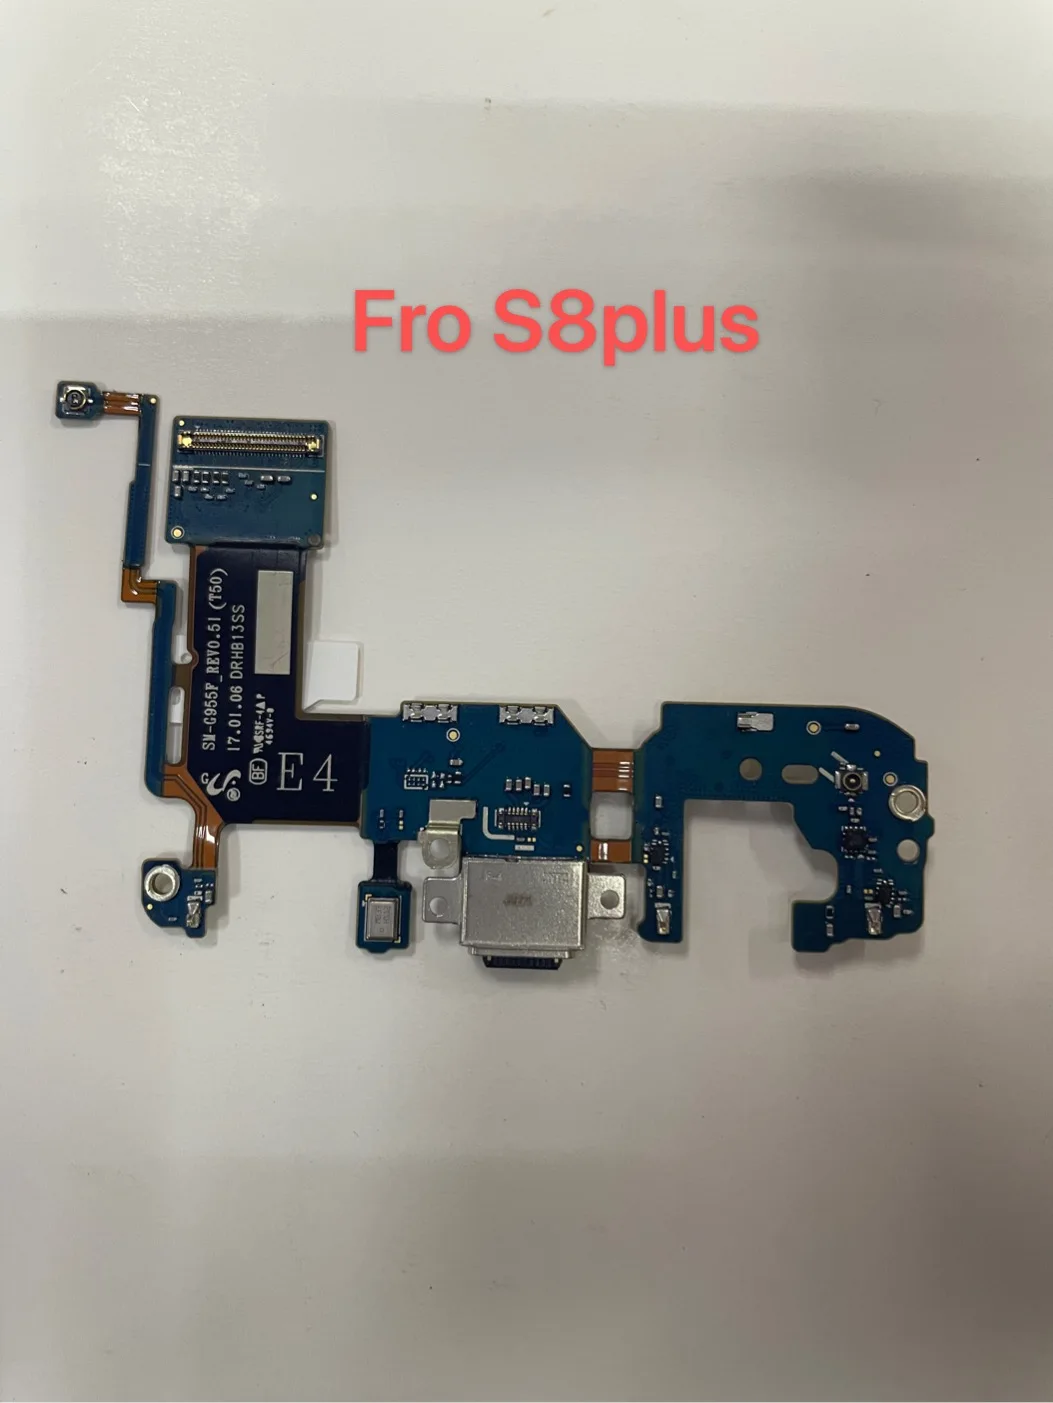 

For Samsung Galaxy S8 G950u G950f G950n S8 Plus G955u G955f G955n Original USB Charging Port Charger Dock Connector Flex Cable